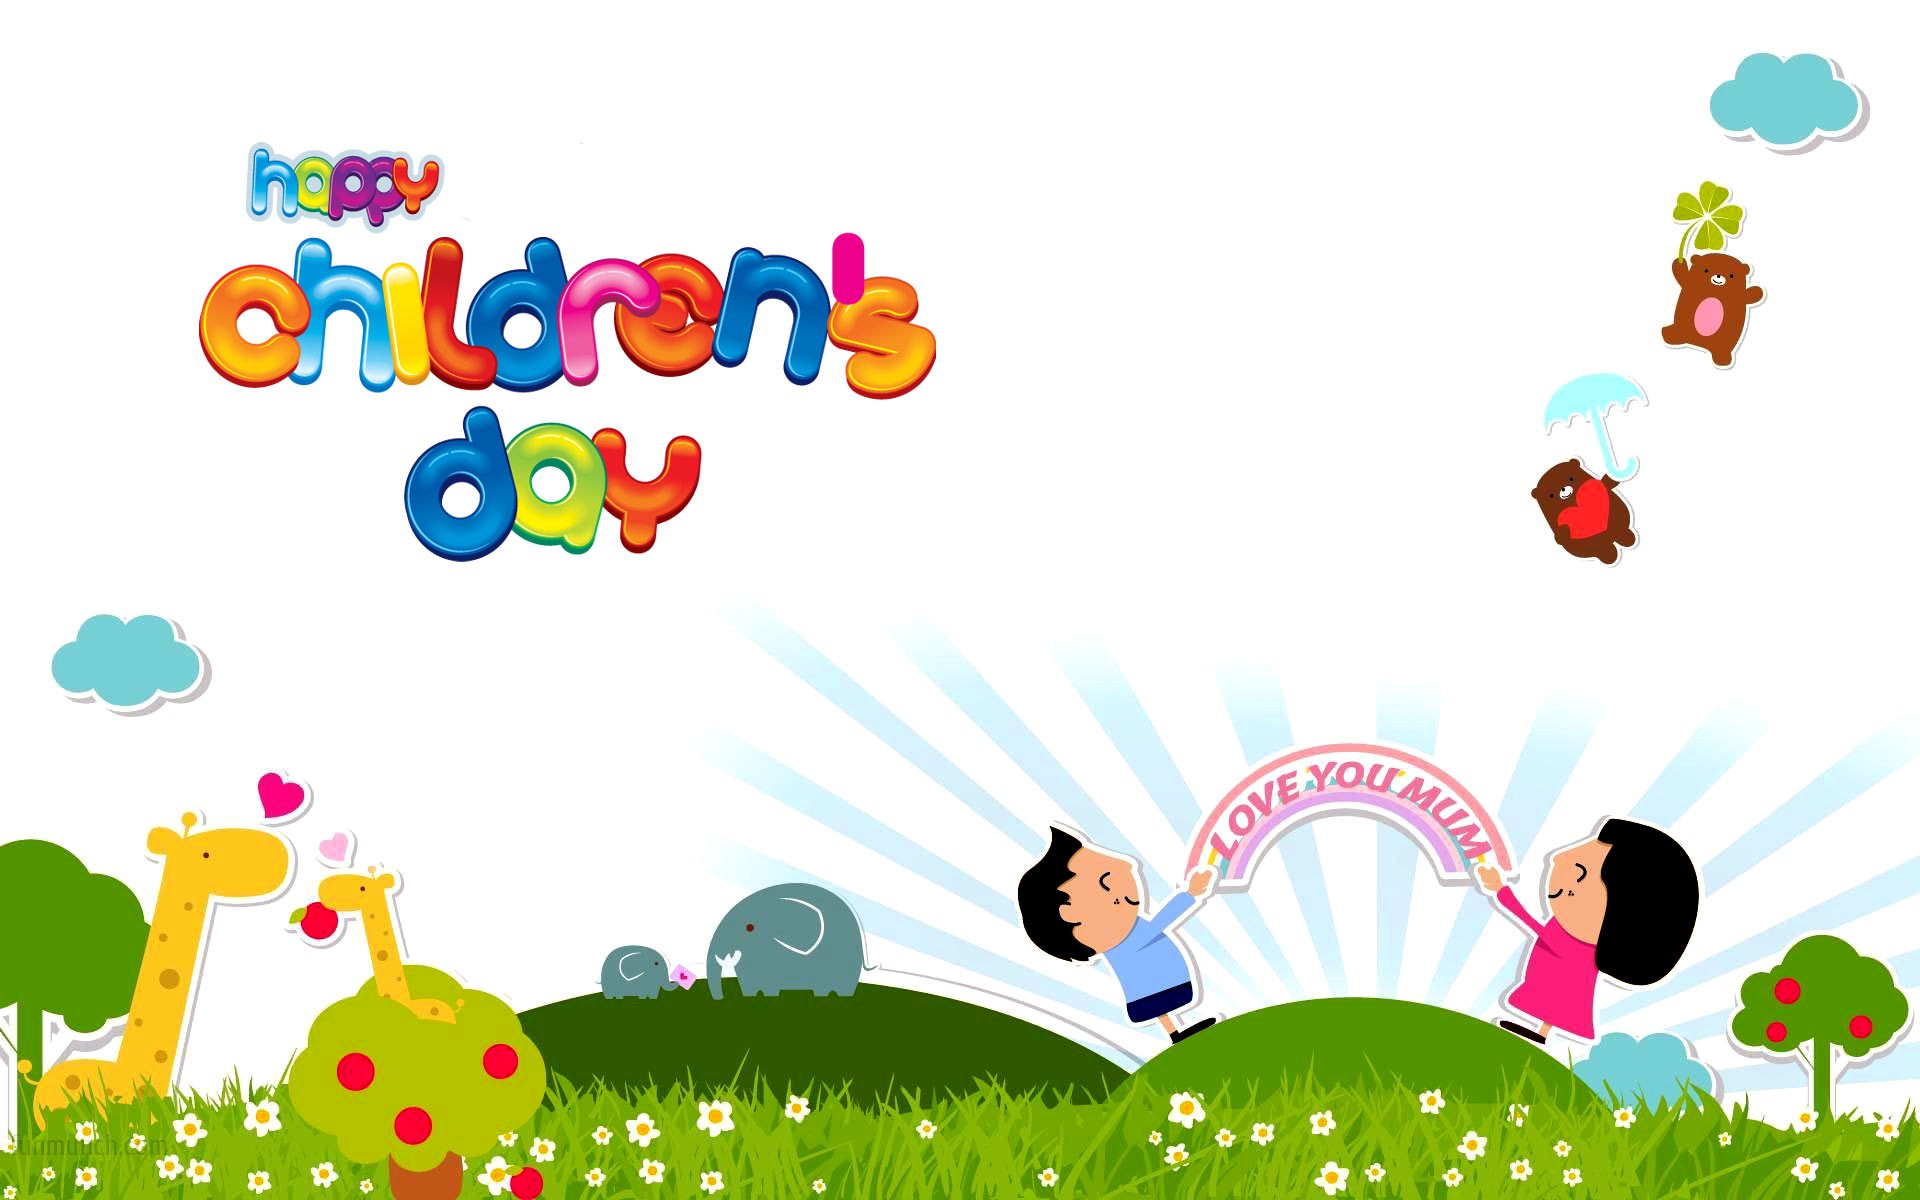 Happy Childrens Day Images, HD Wallpapers, and Photos (Free Download)